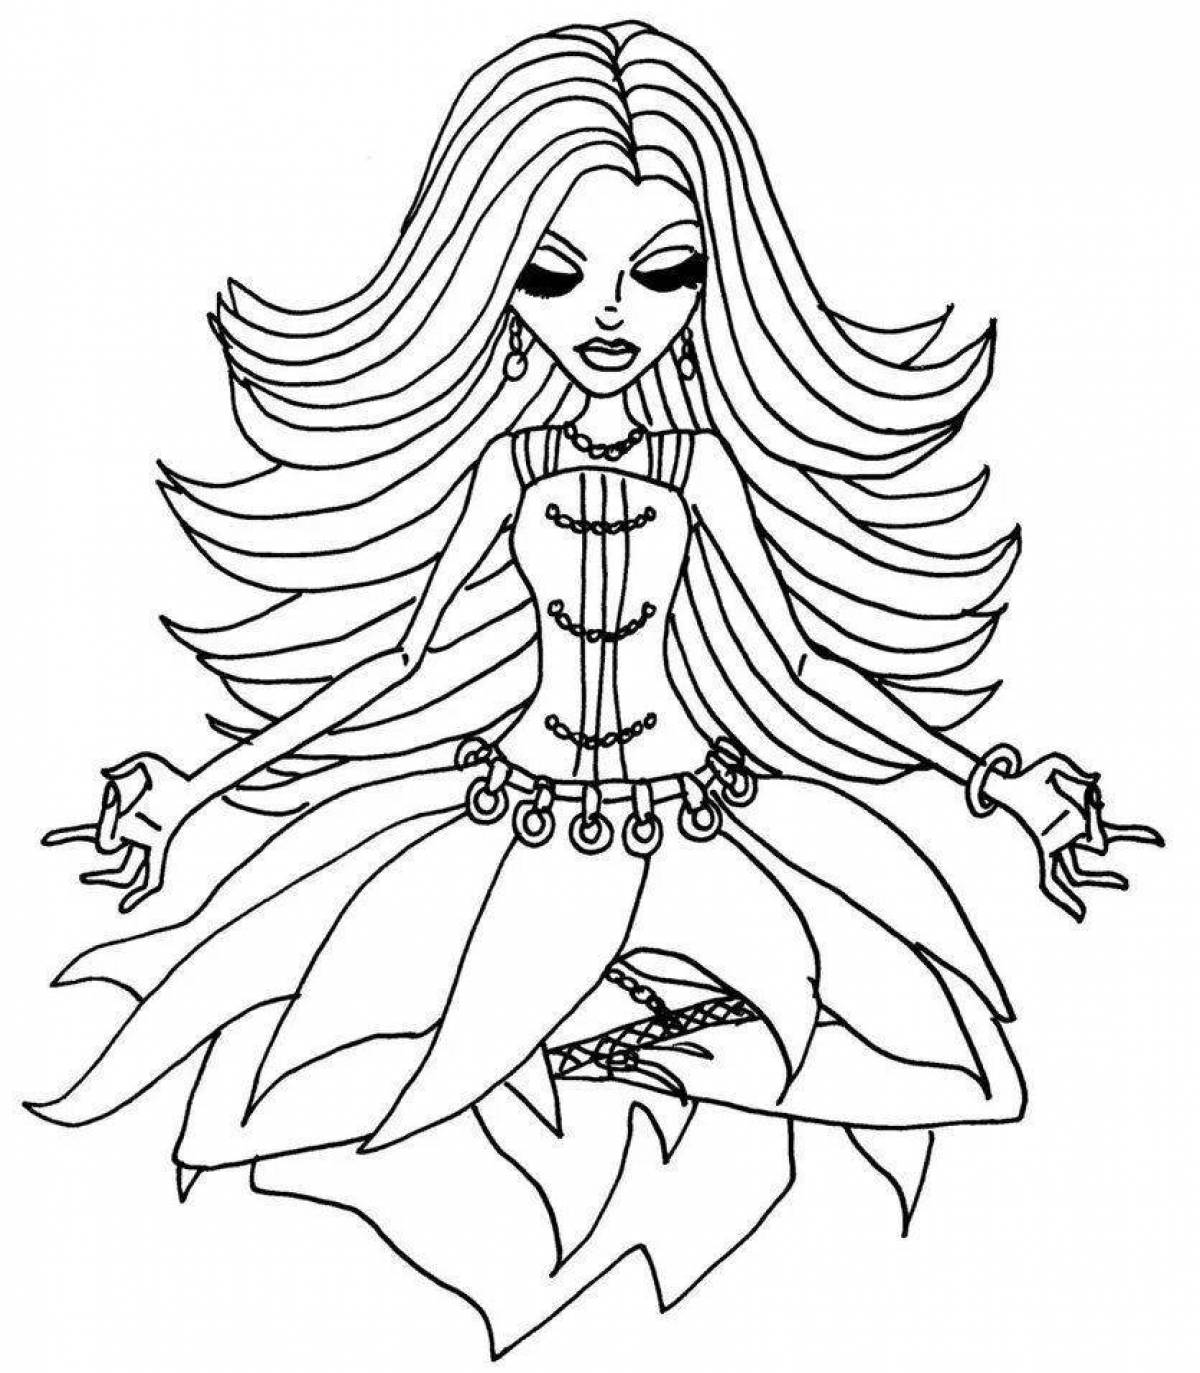 Animated monster high dolls coloring page